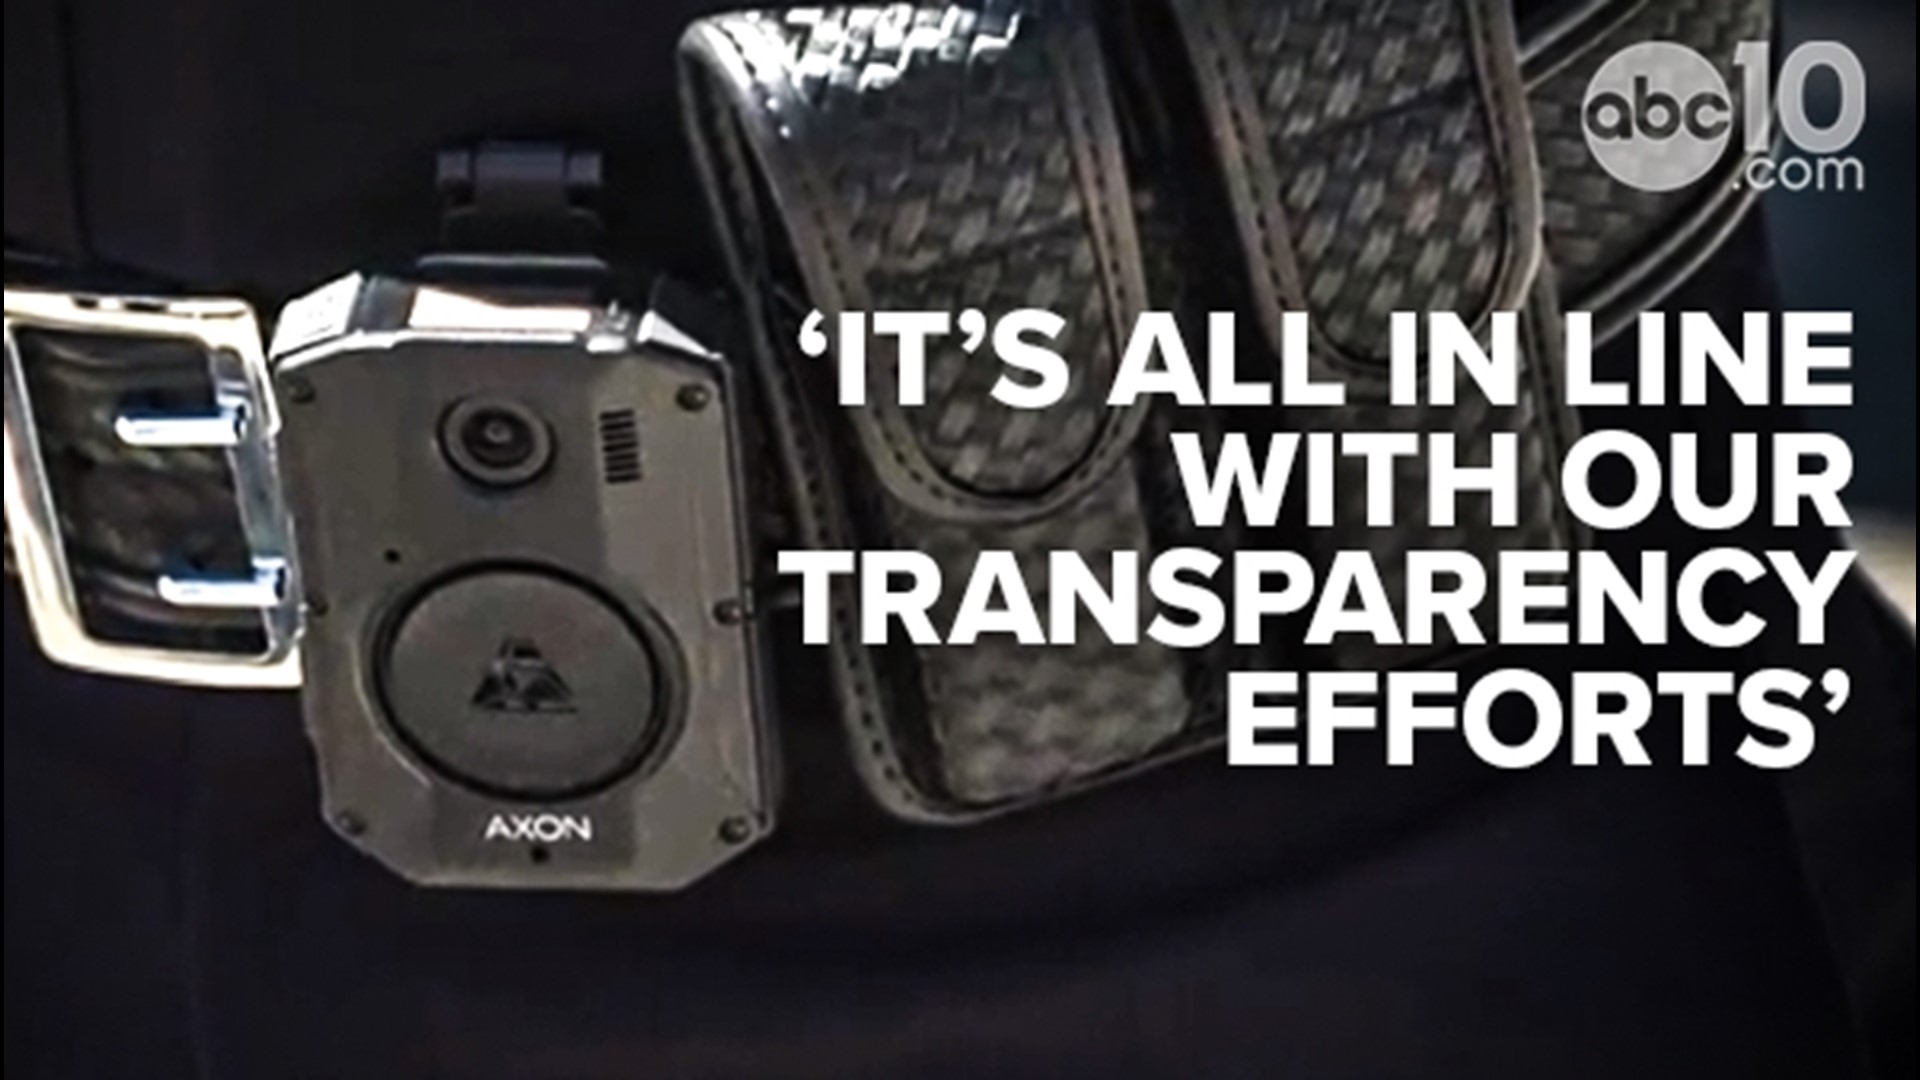 The technology known as Axon Signal Sidearm uses a magnet to turn on a police officer's body-worn camera when it detects the officer's gun was unholstered.